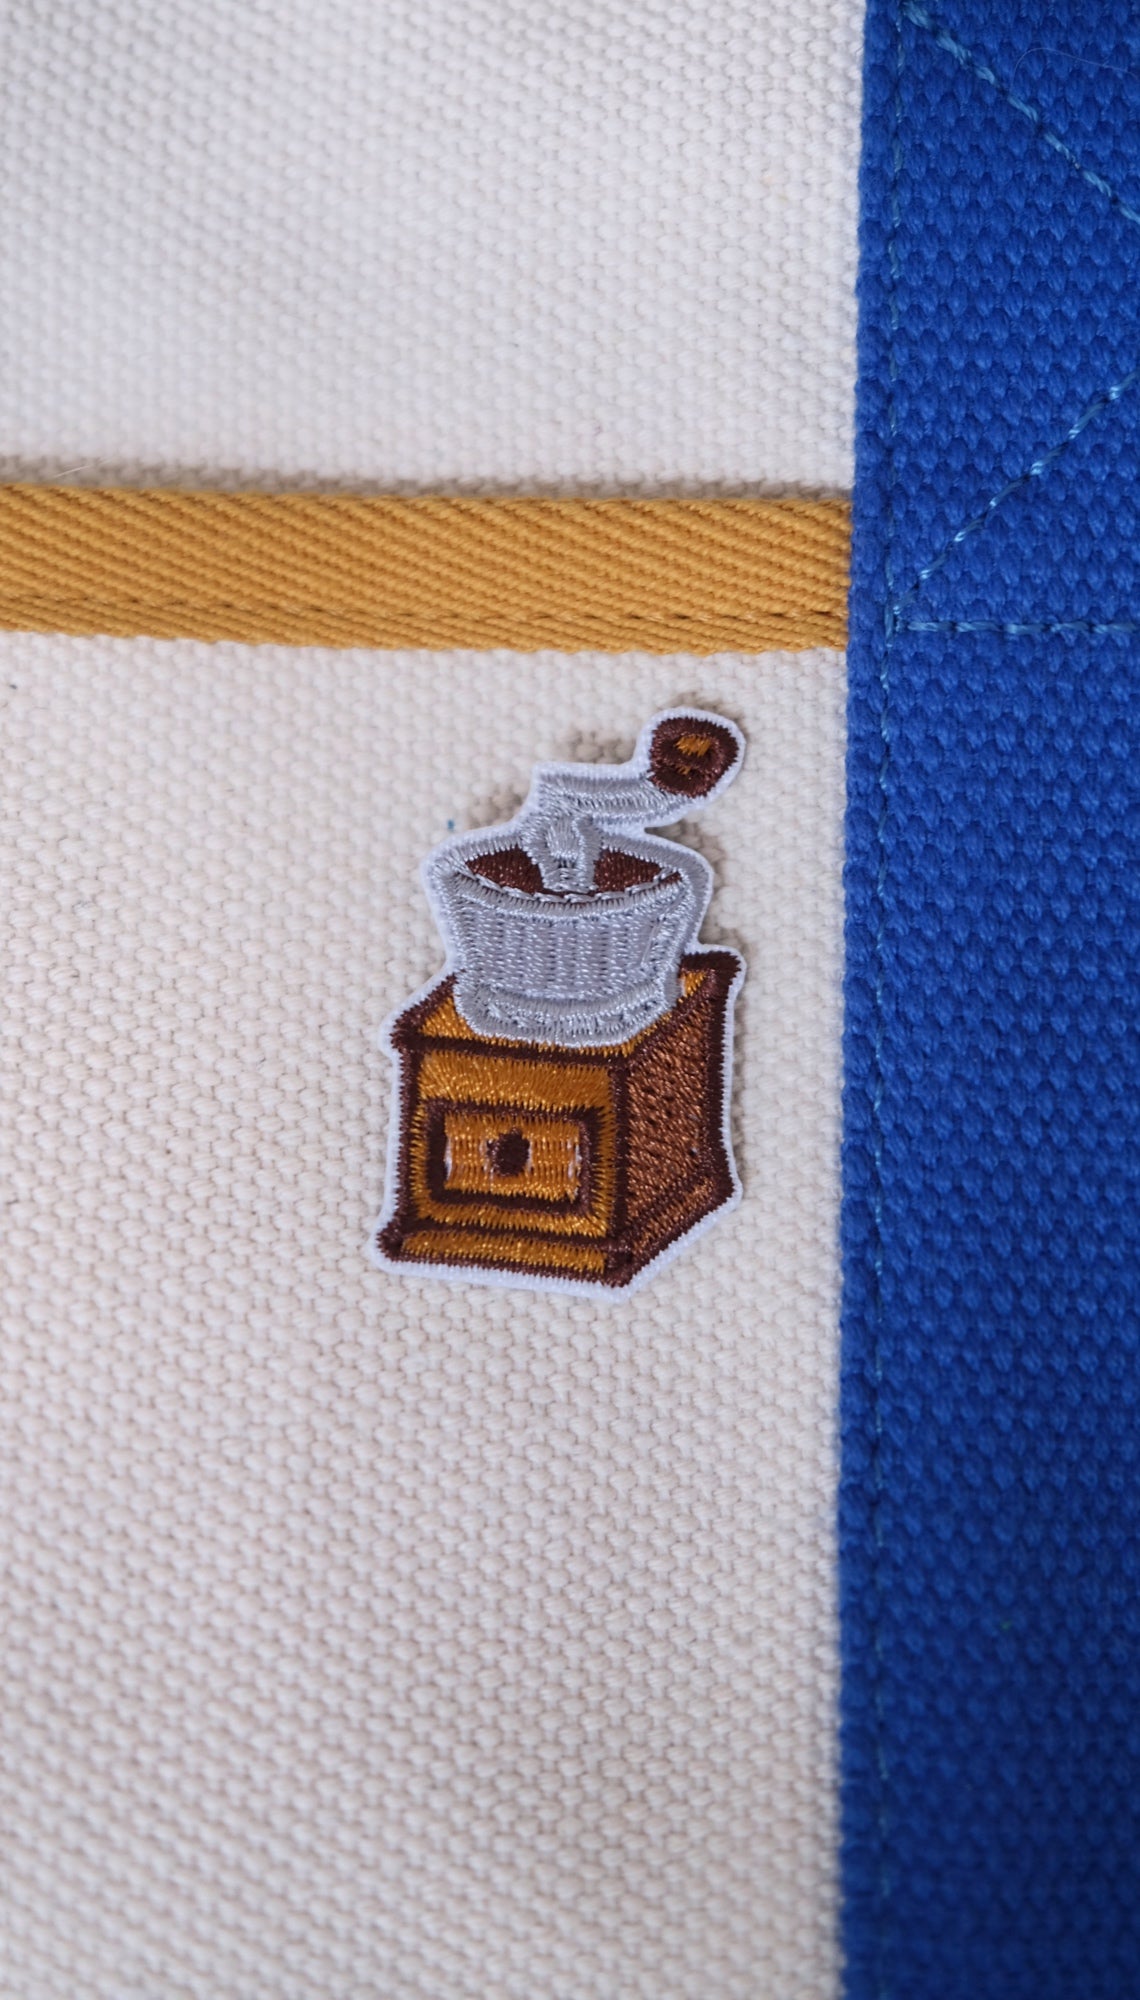 Coffee Grinder Iron-on Patch.